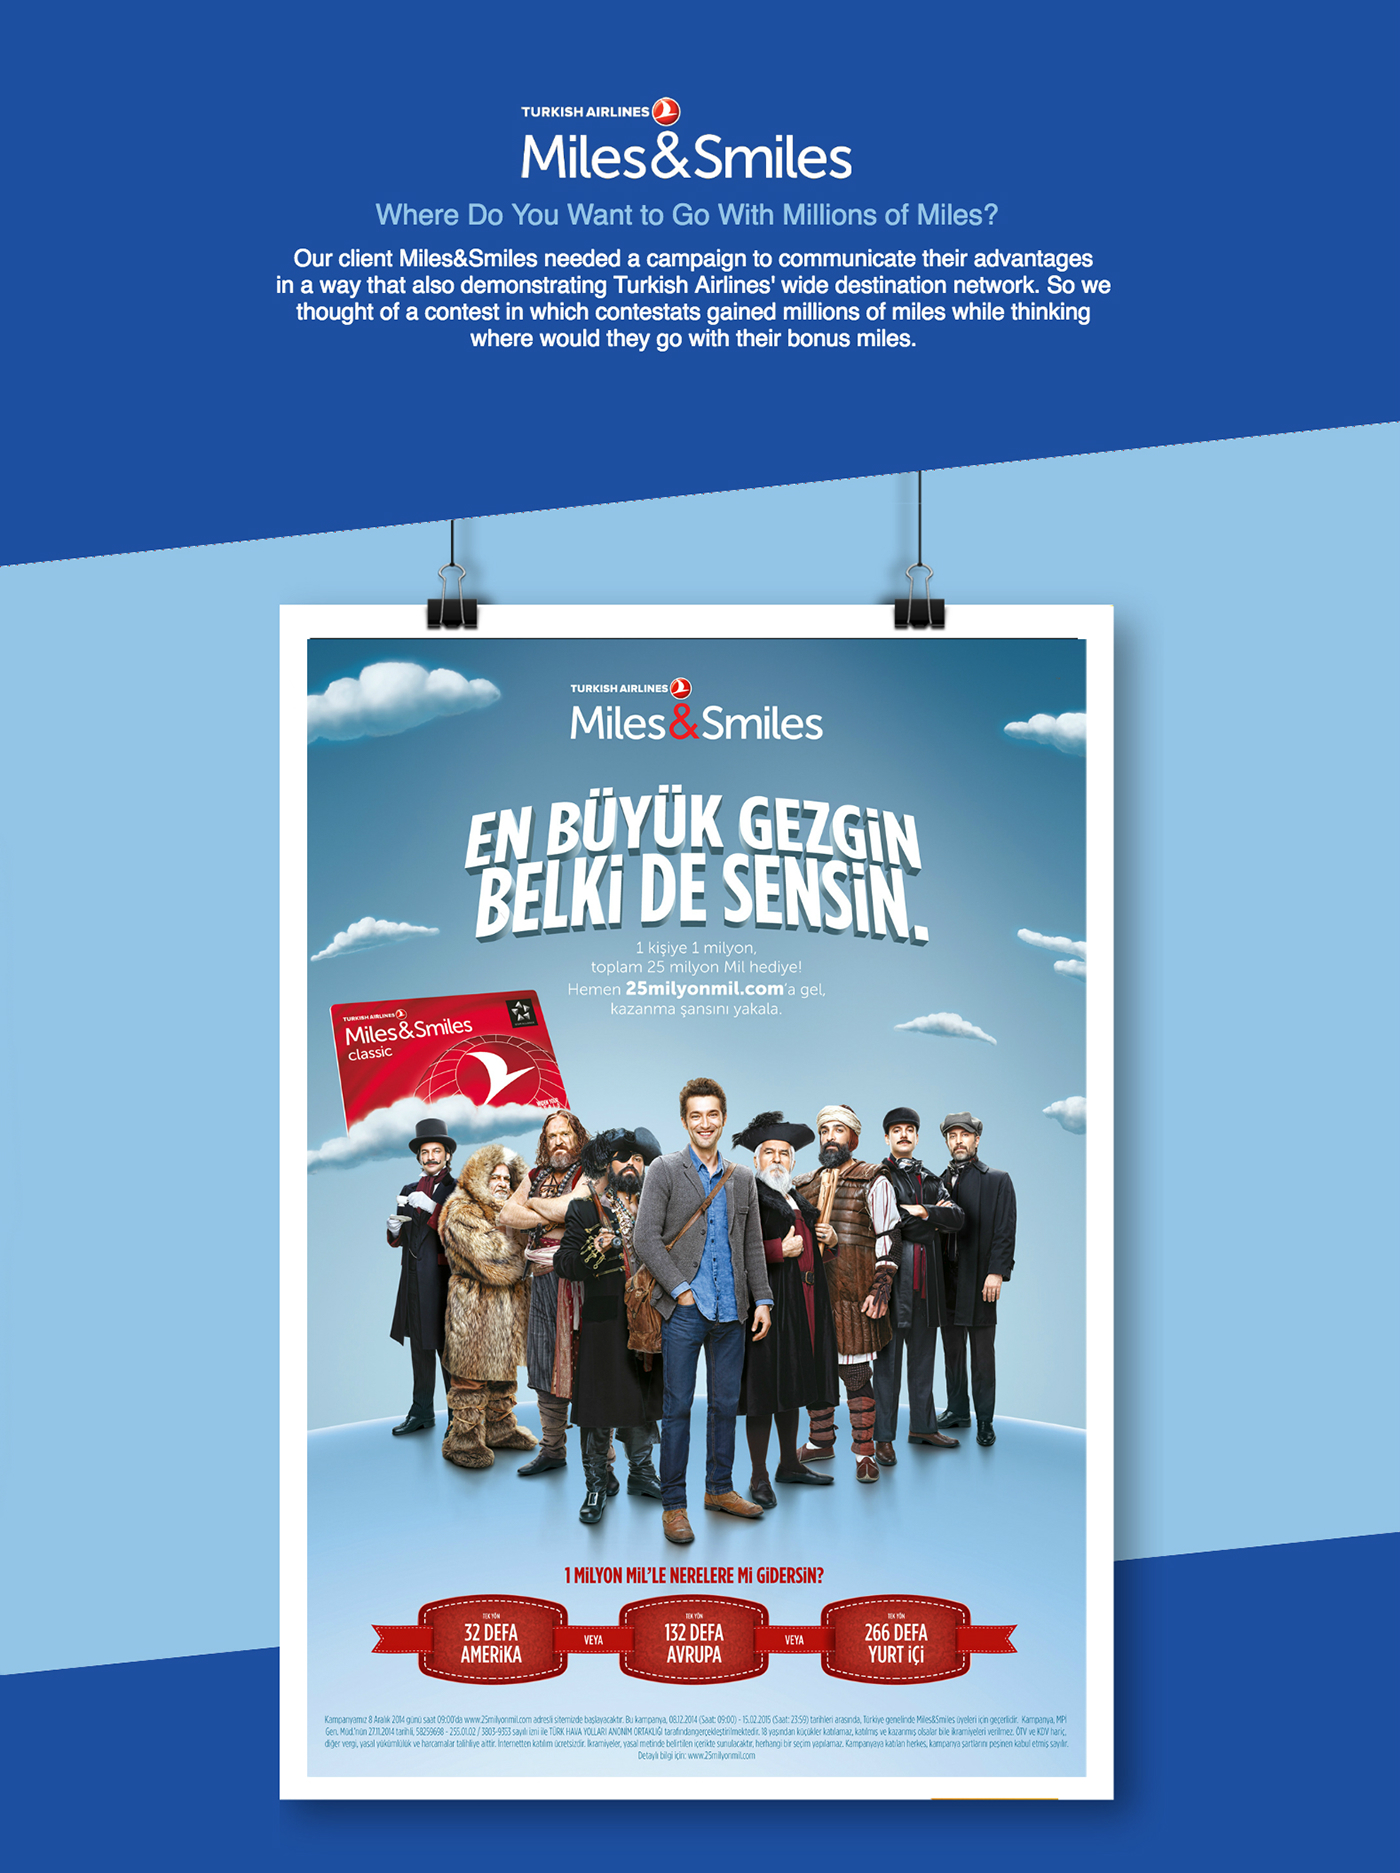 miles&smiles Turkish Airlines THY 25 Million Miles campaign free miles Holiday miles airline celebration anniversary the greatest traveller Travel en büyük gezgin